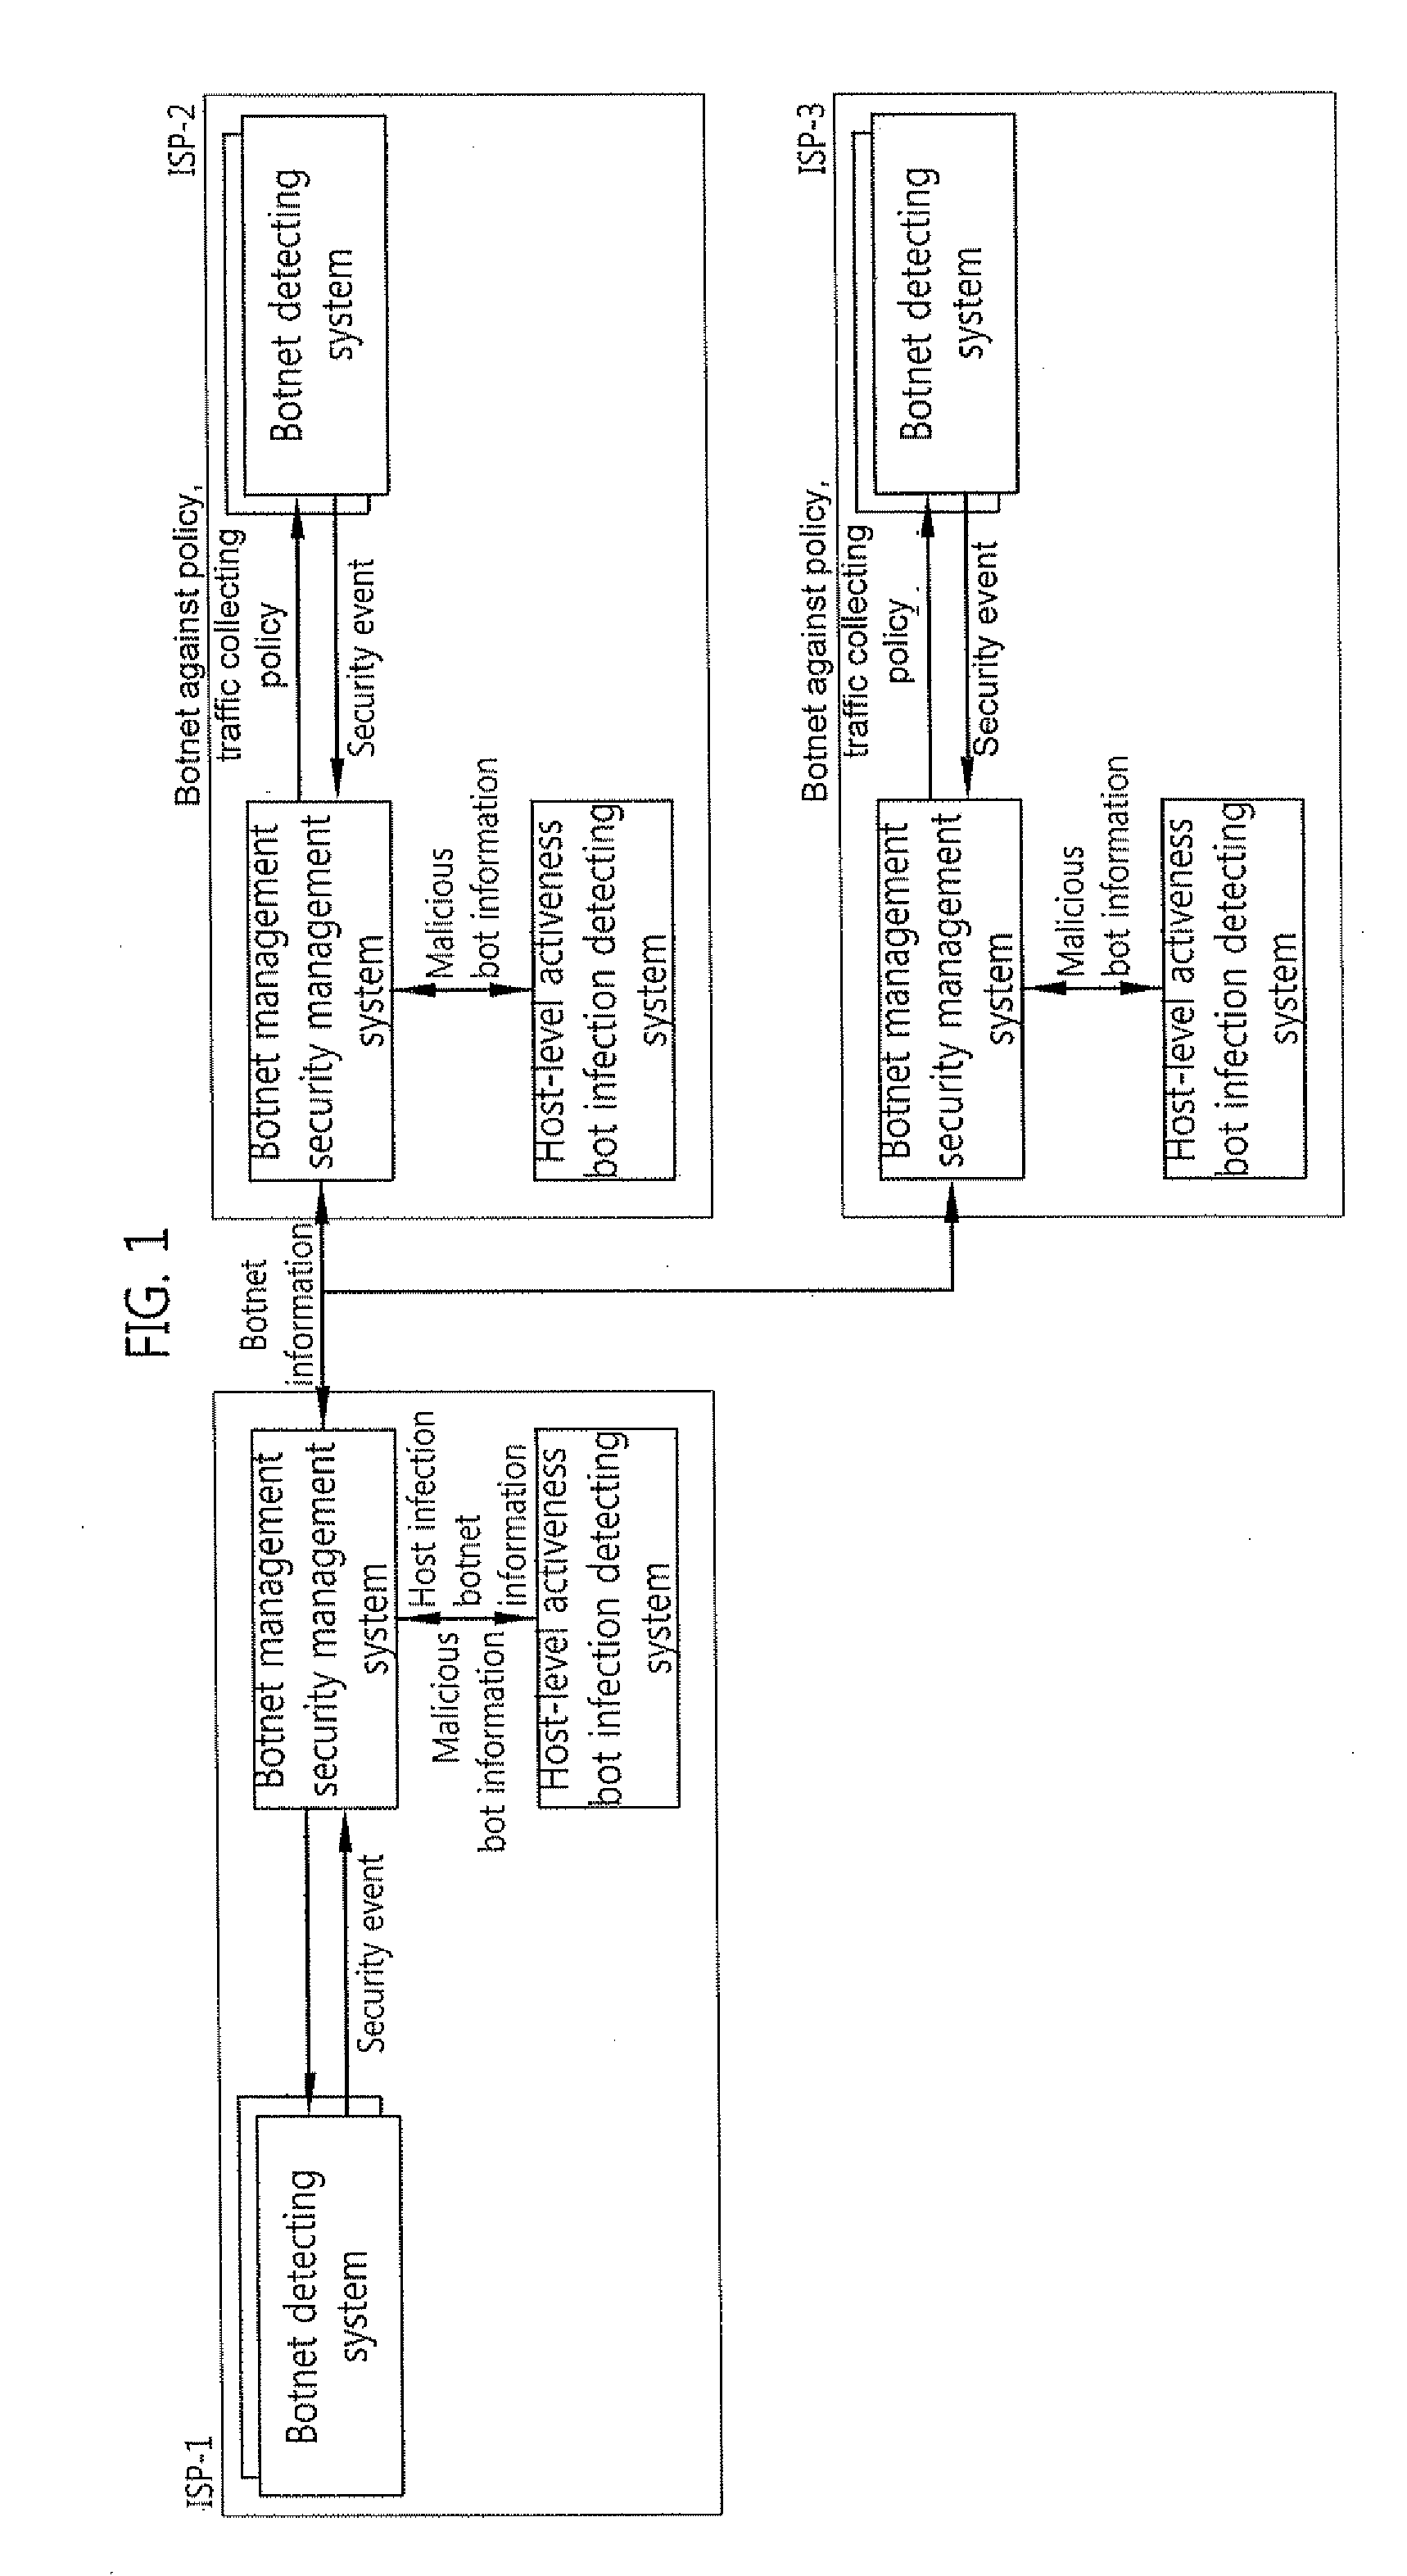 Security system of managing irc and HTTP botnets, and method therefor